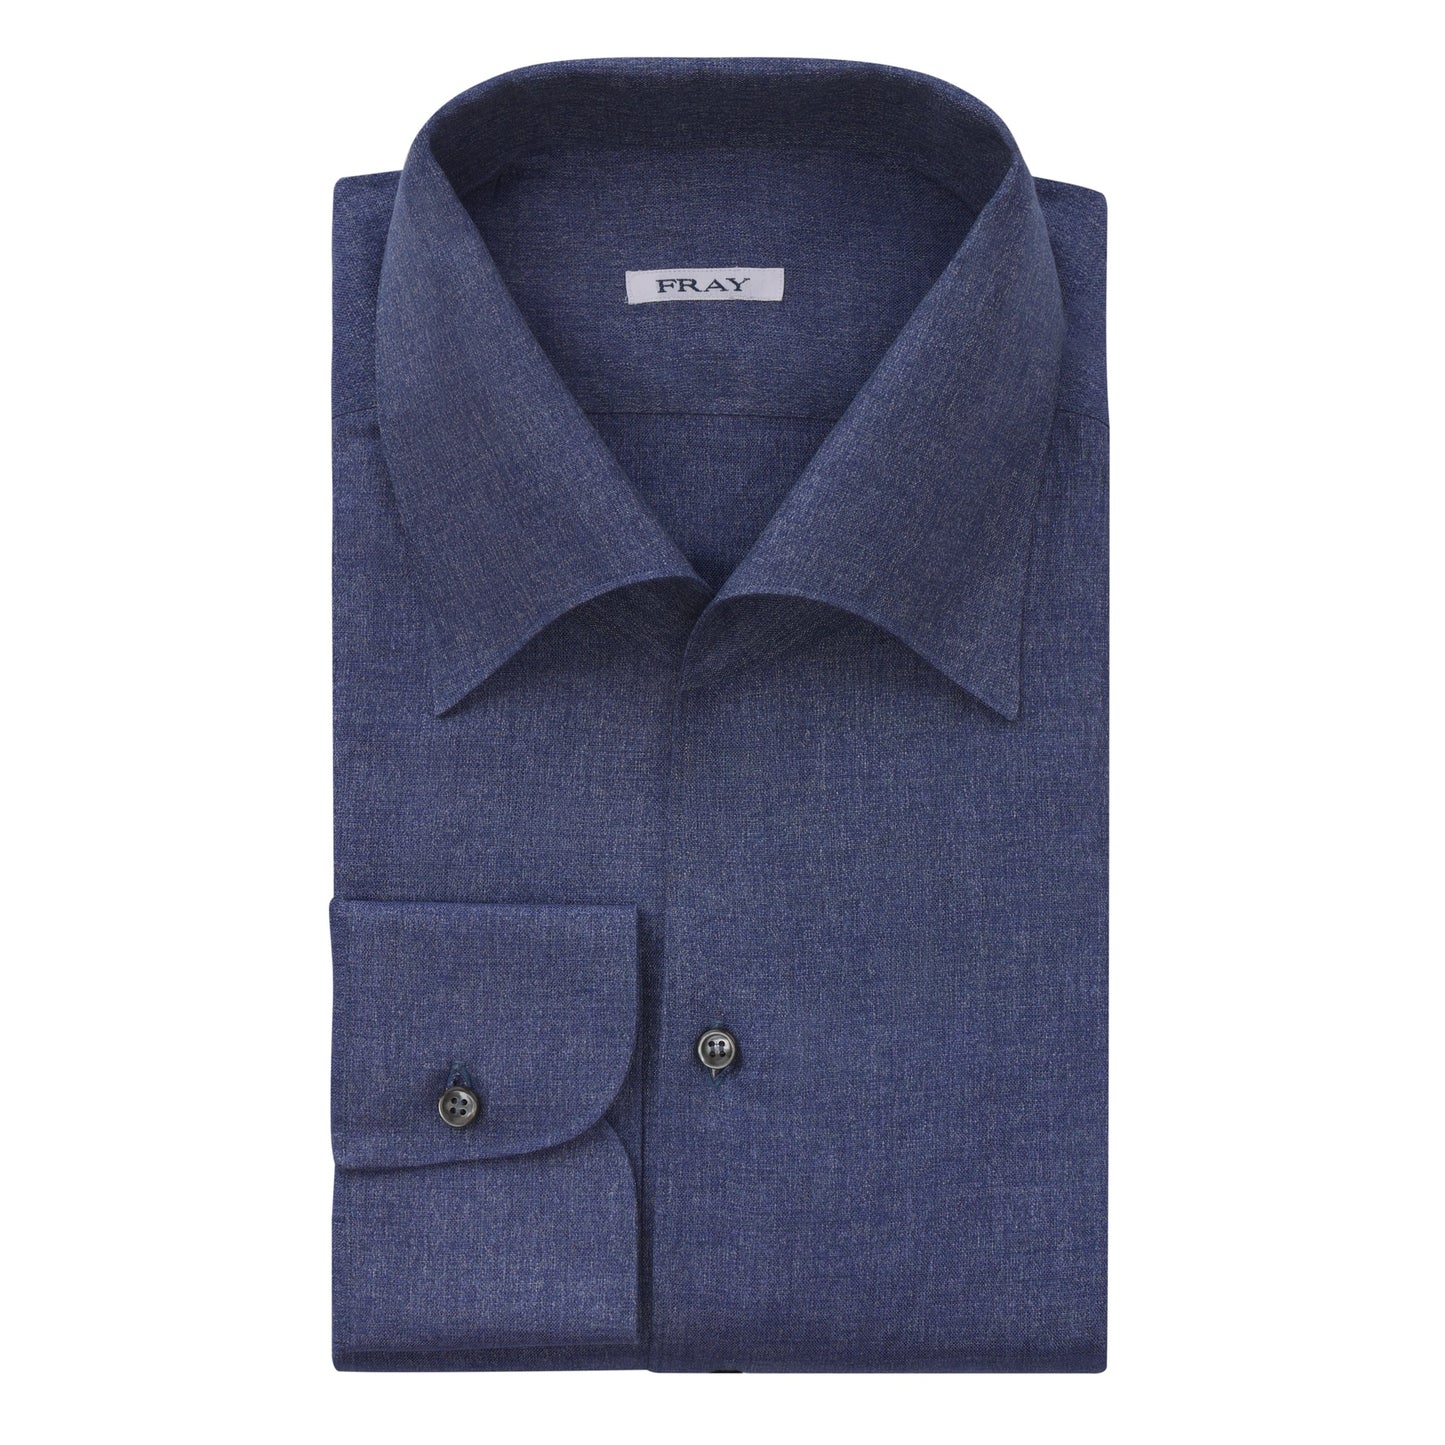 Fray Linen - Cotton Shirt in Blue Melange with Open Collar - SARTALE